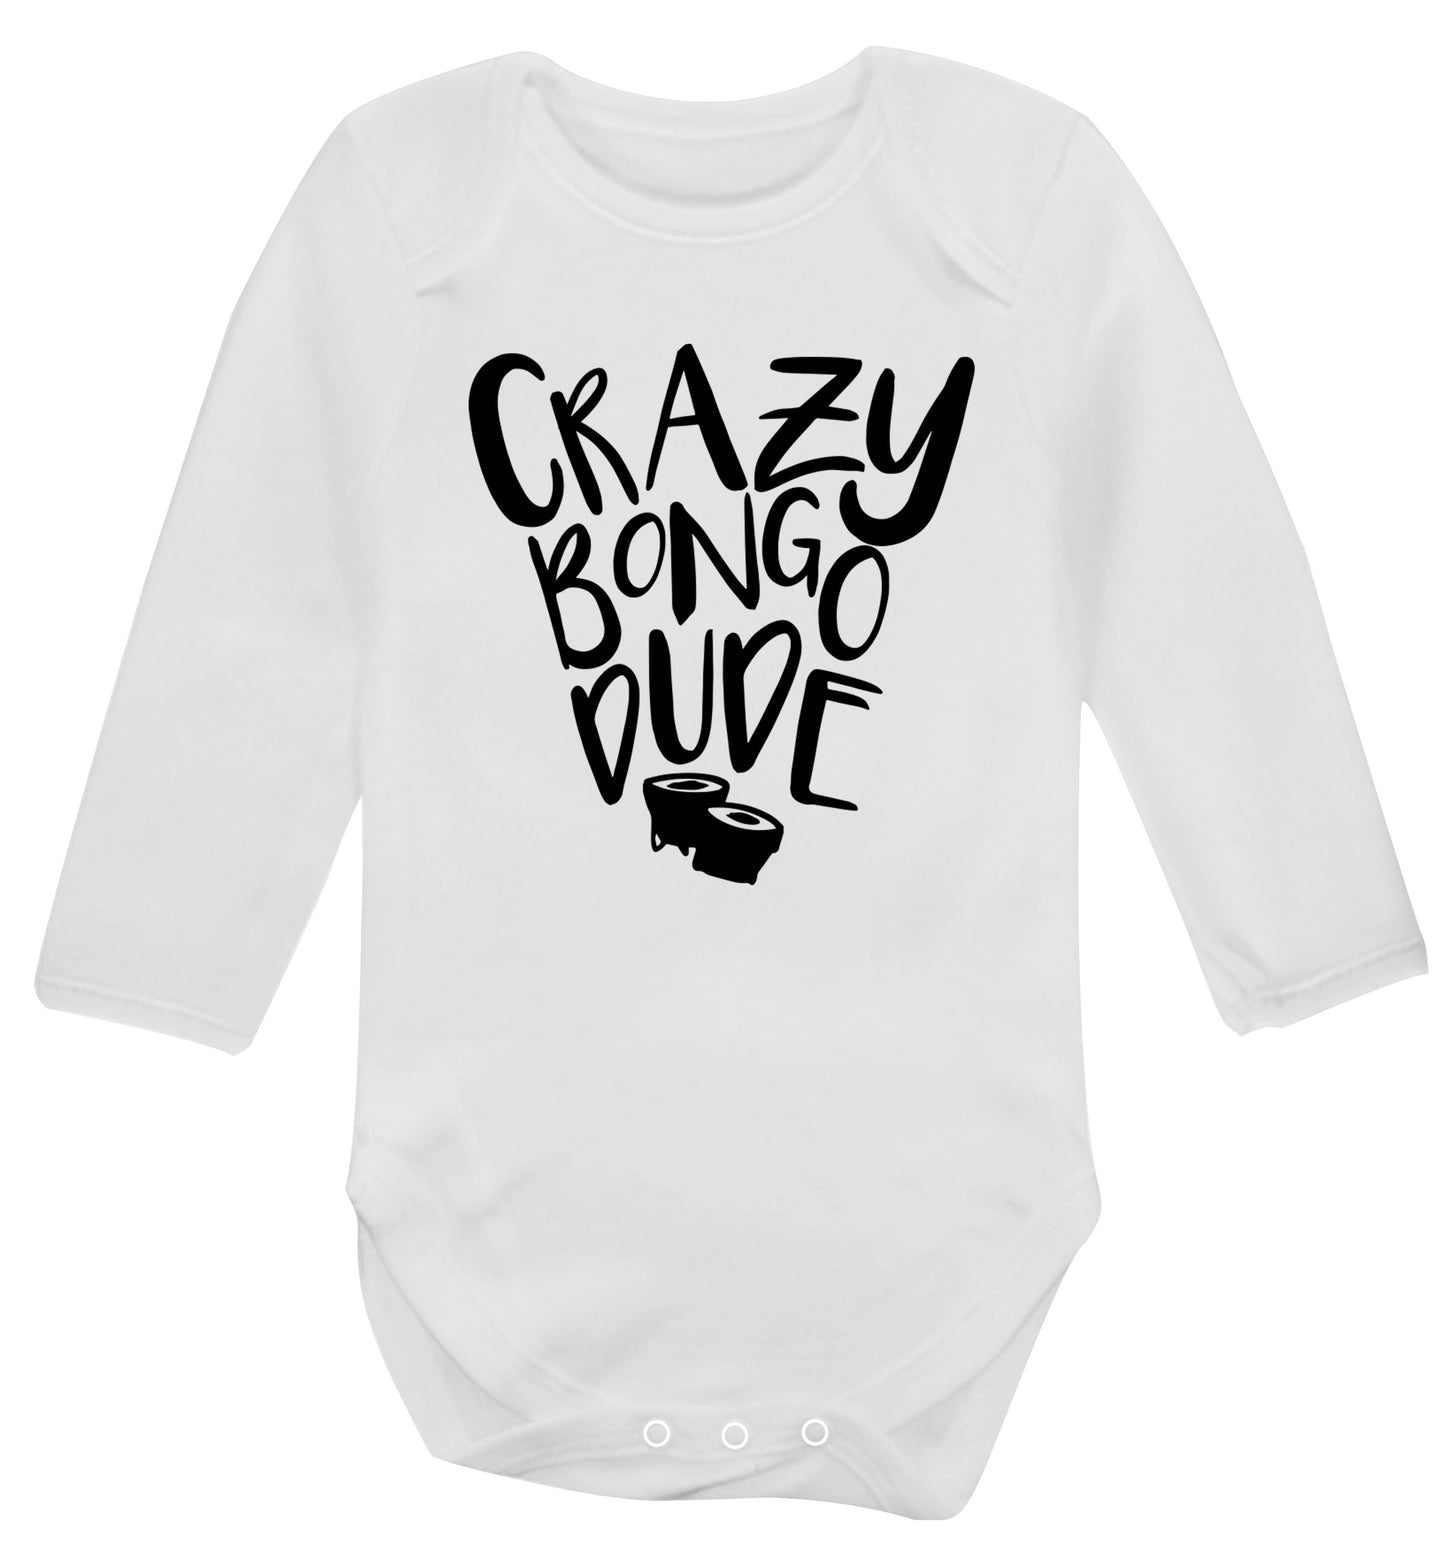 Crazy bongo dude Baby Vest long sleeved white 6-12 months